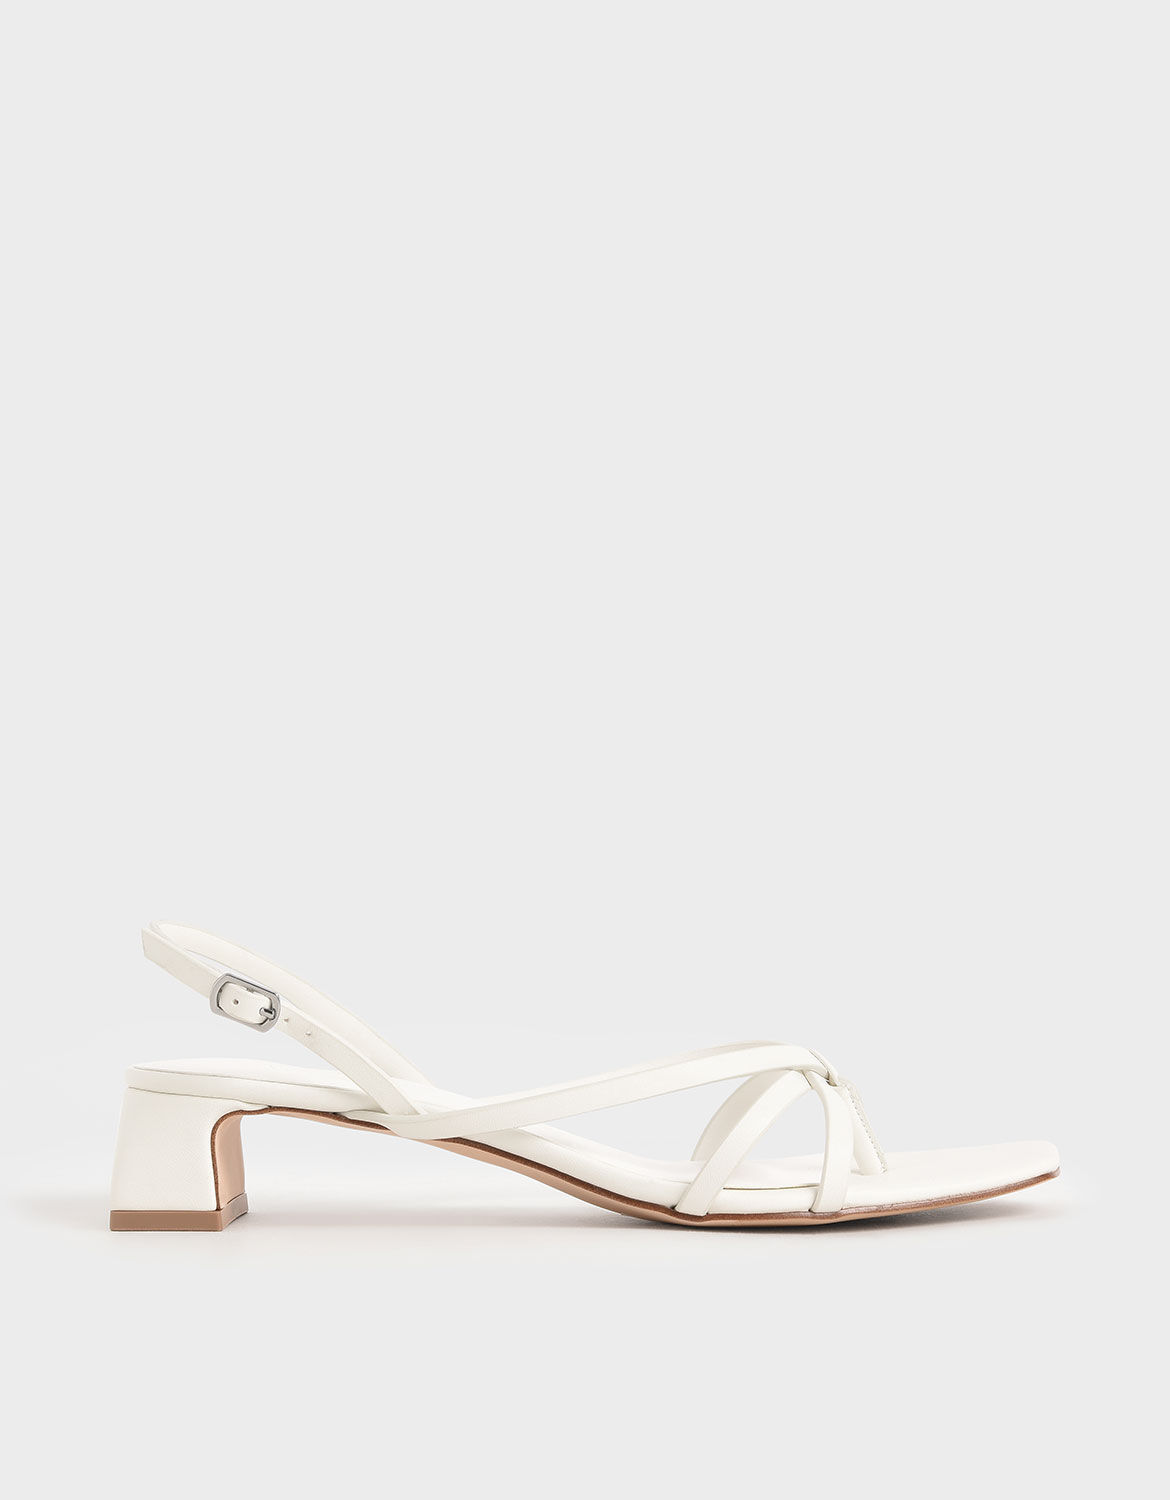 White Strappy Sandals | CHARLES \u0026 KEITH US